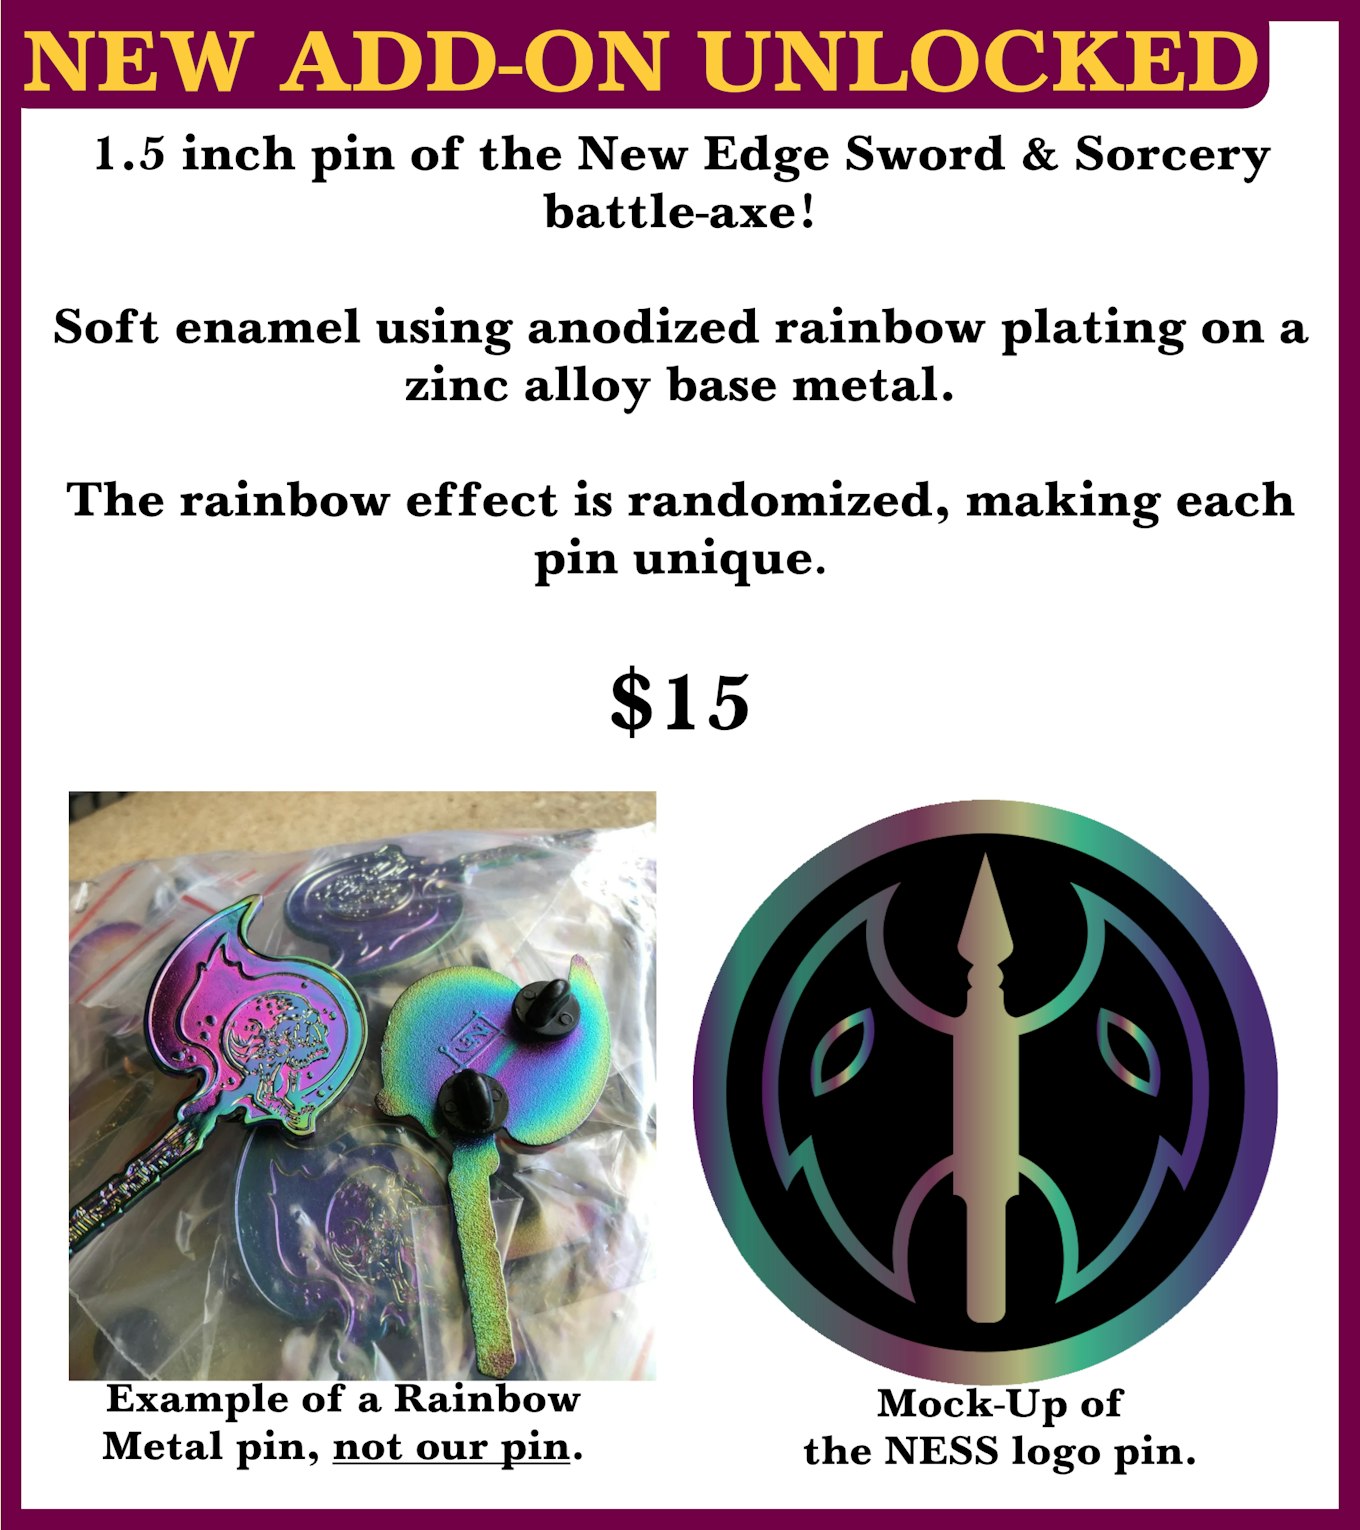  New Add-on Unlocked. 1.5 inch pin of the new edge sword & sorcery battle-axe! Soft enamel using anodized rainbow plating on a zinc allow base metal. The rainbow effect is randomized, making each pin unique. $15 